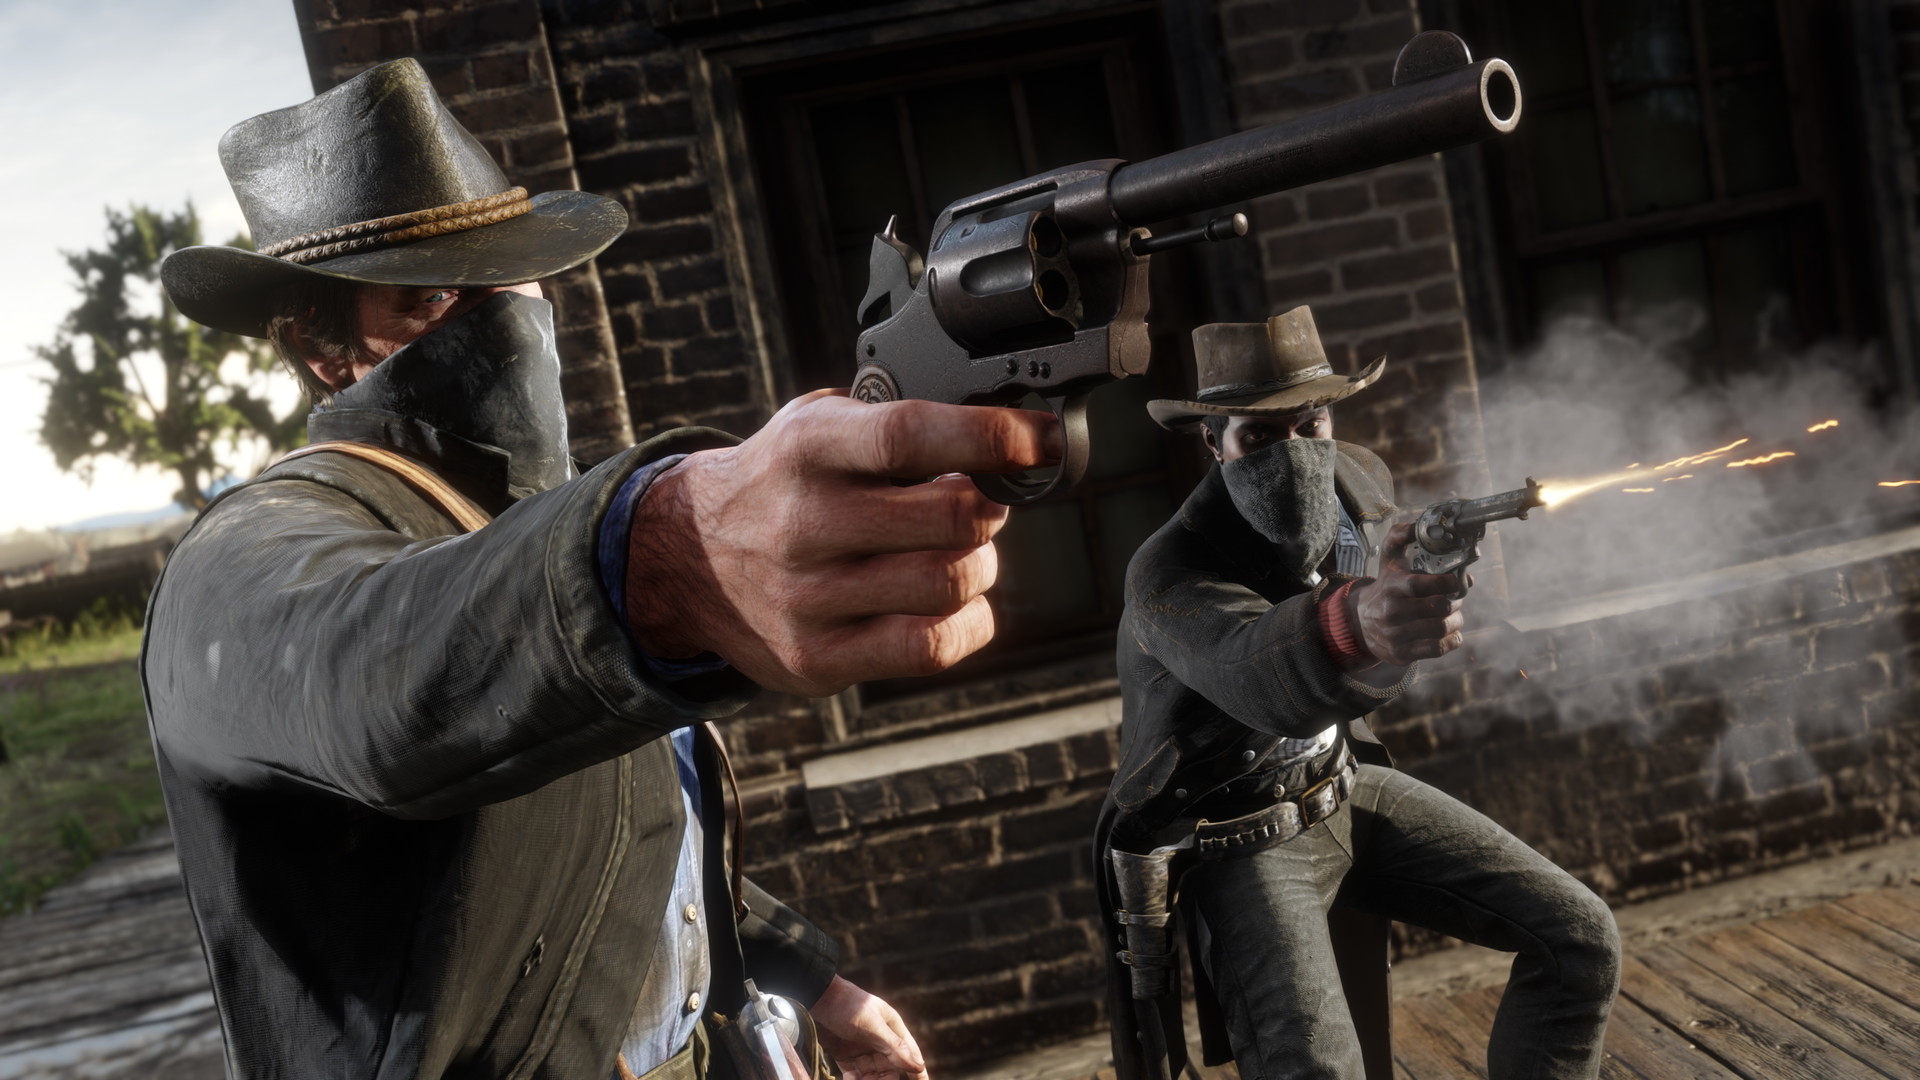 Save 50% on Red Dead Redemption 2 on Steam